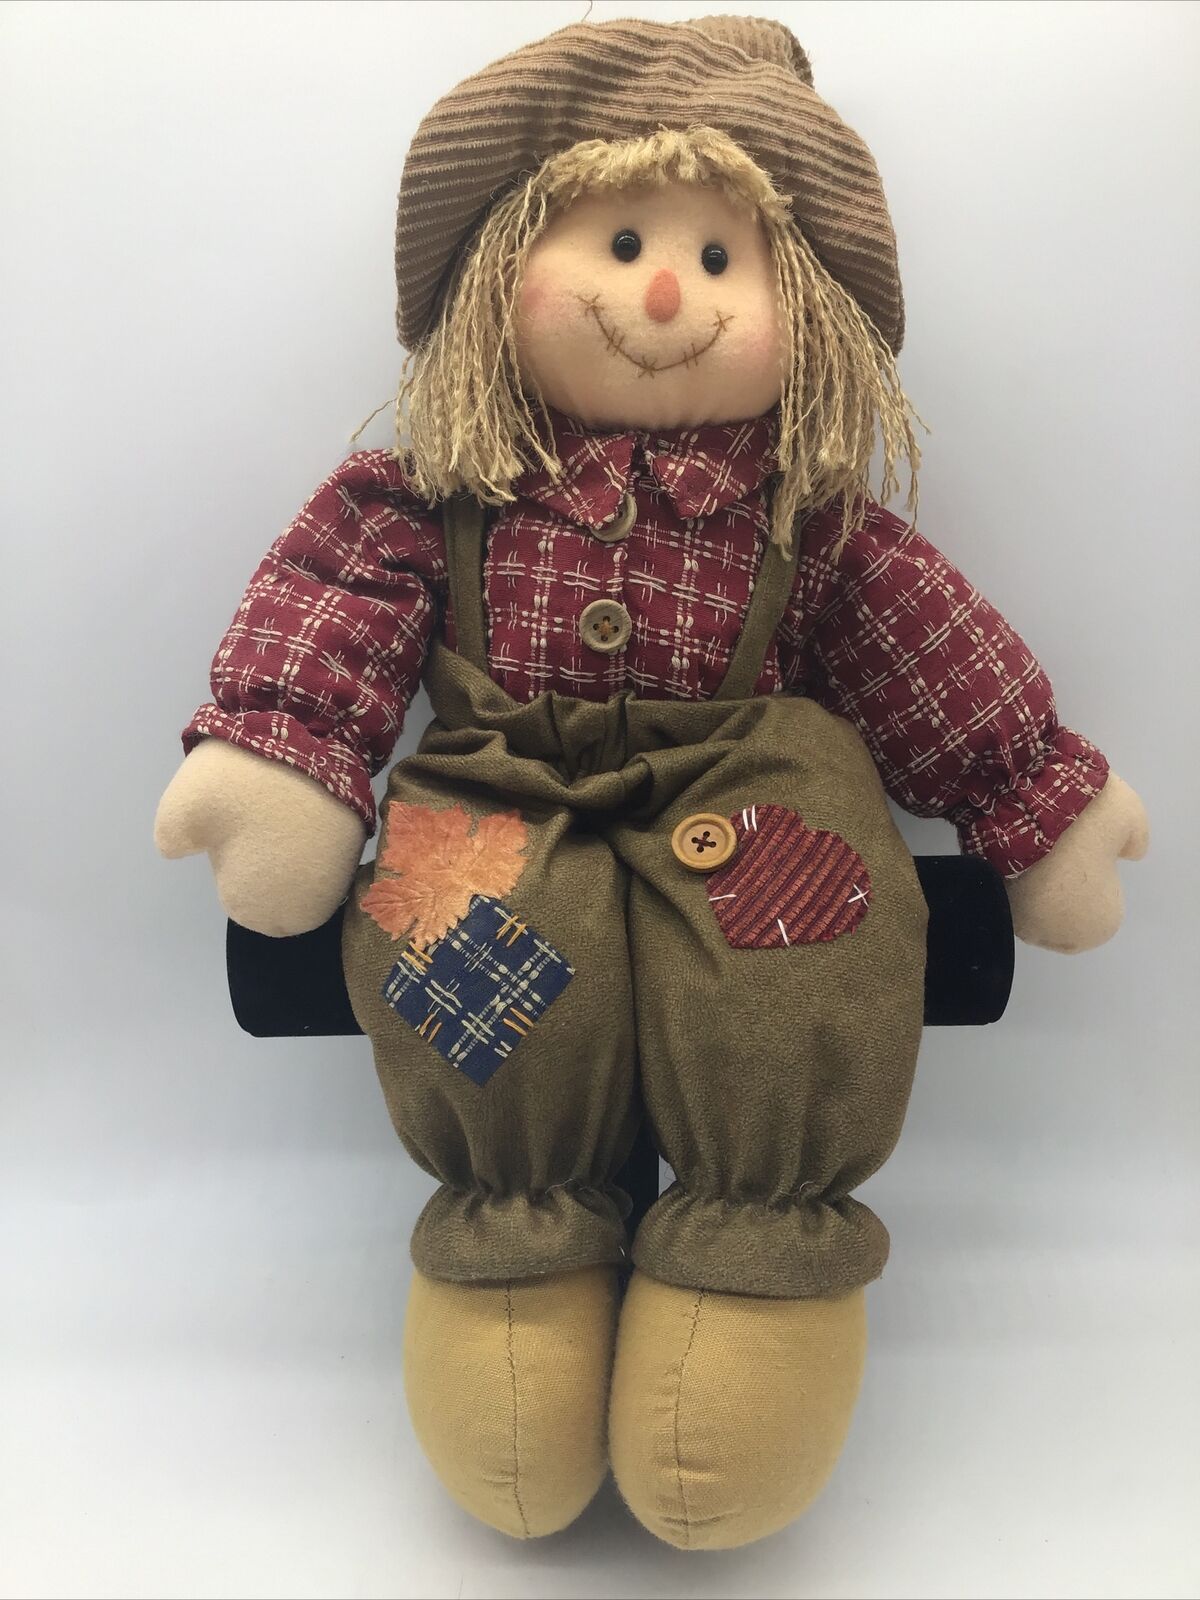 2003 Vintage Prima Creations Primitive Sitting Fall/Thanksgiving Scarcrow Doll